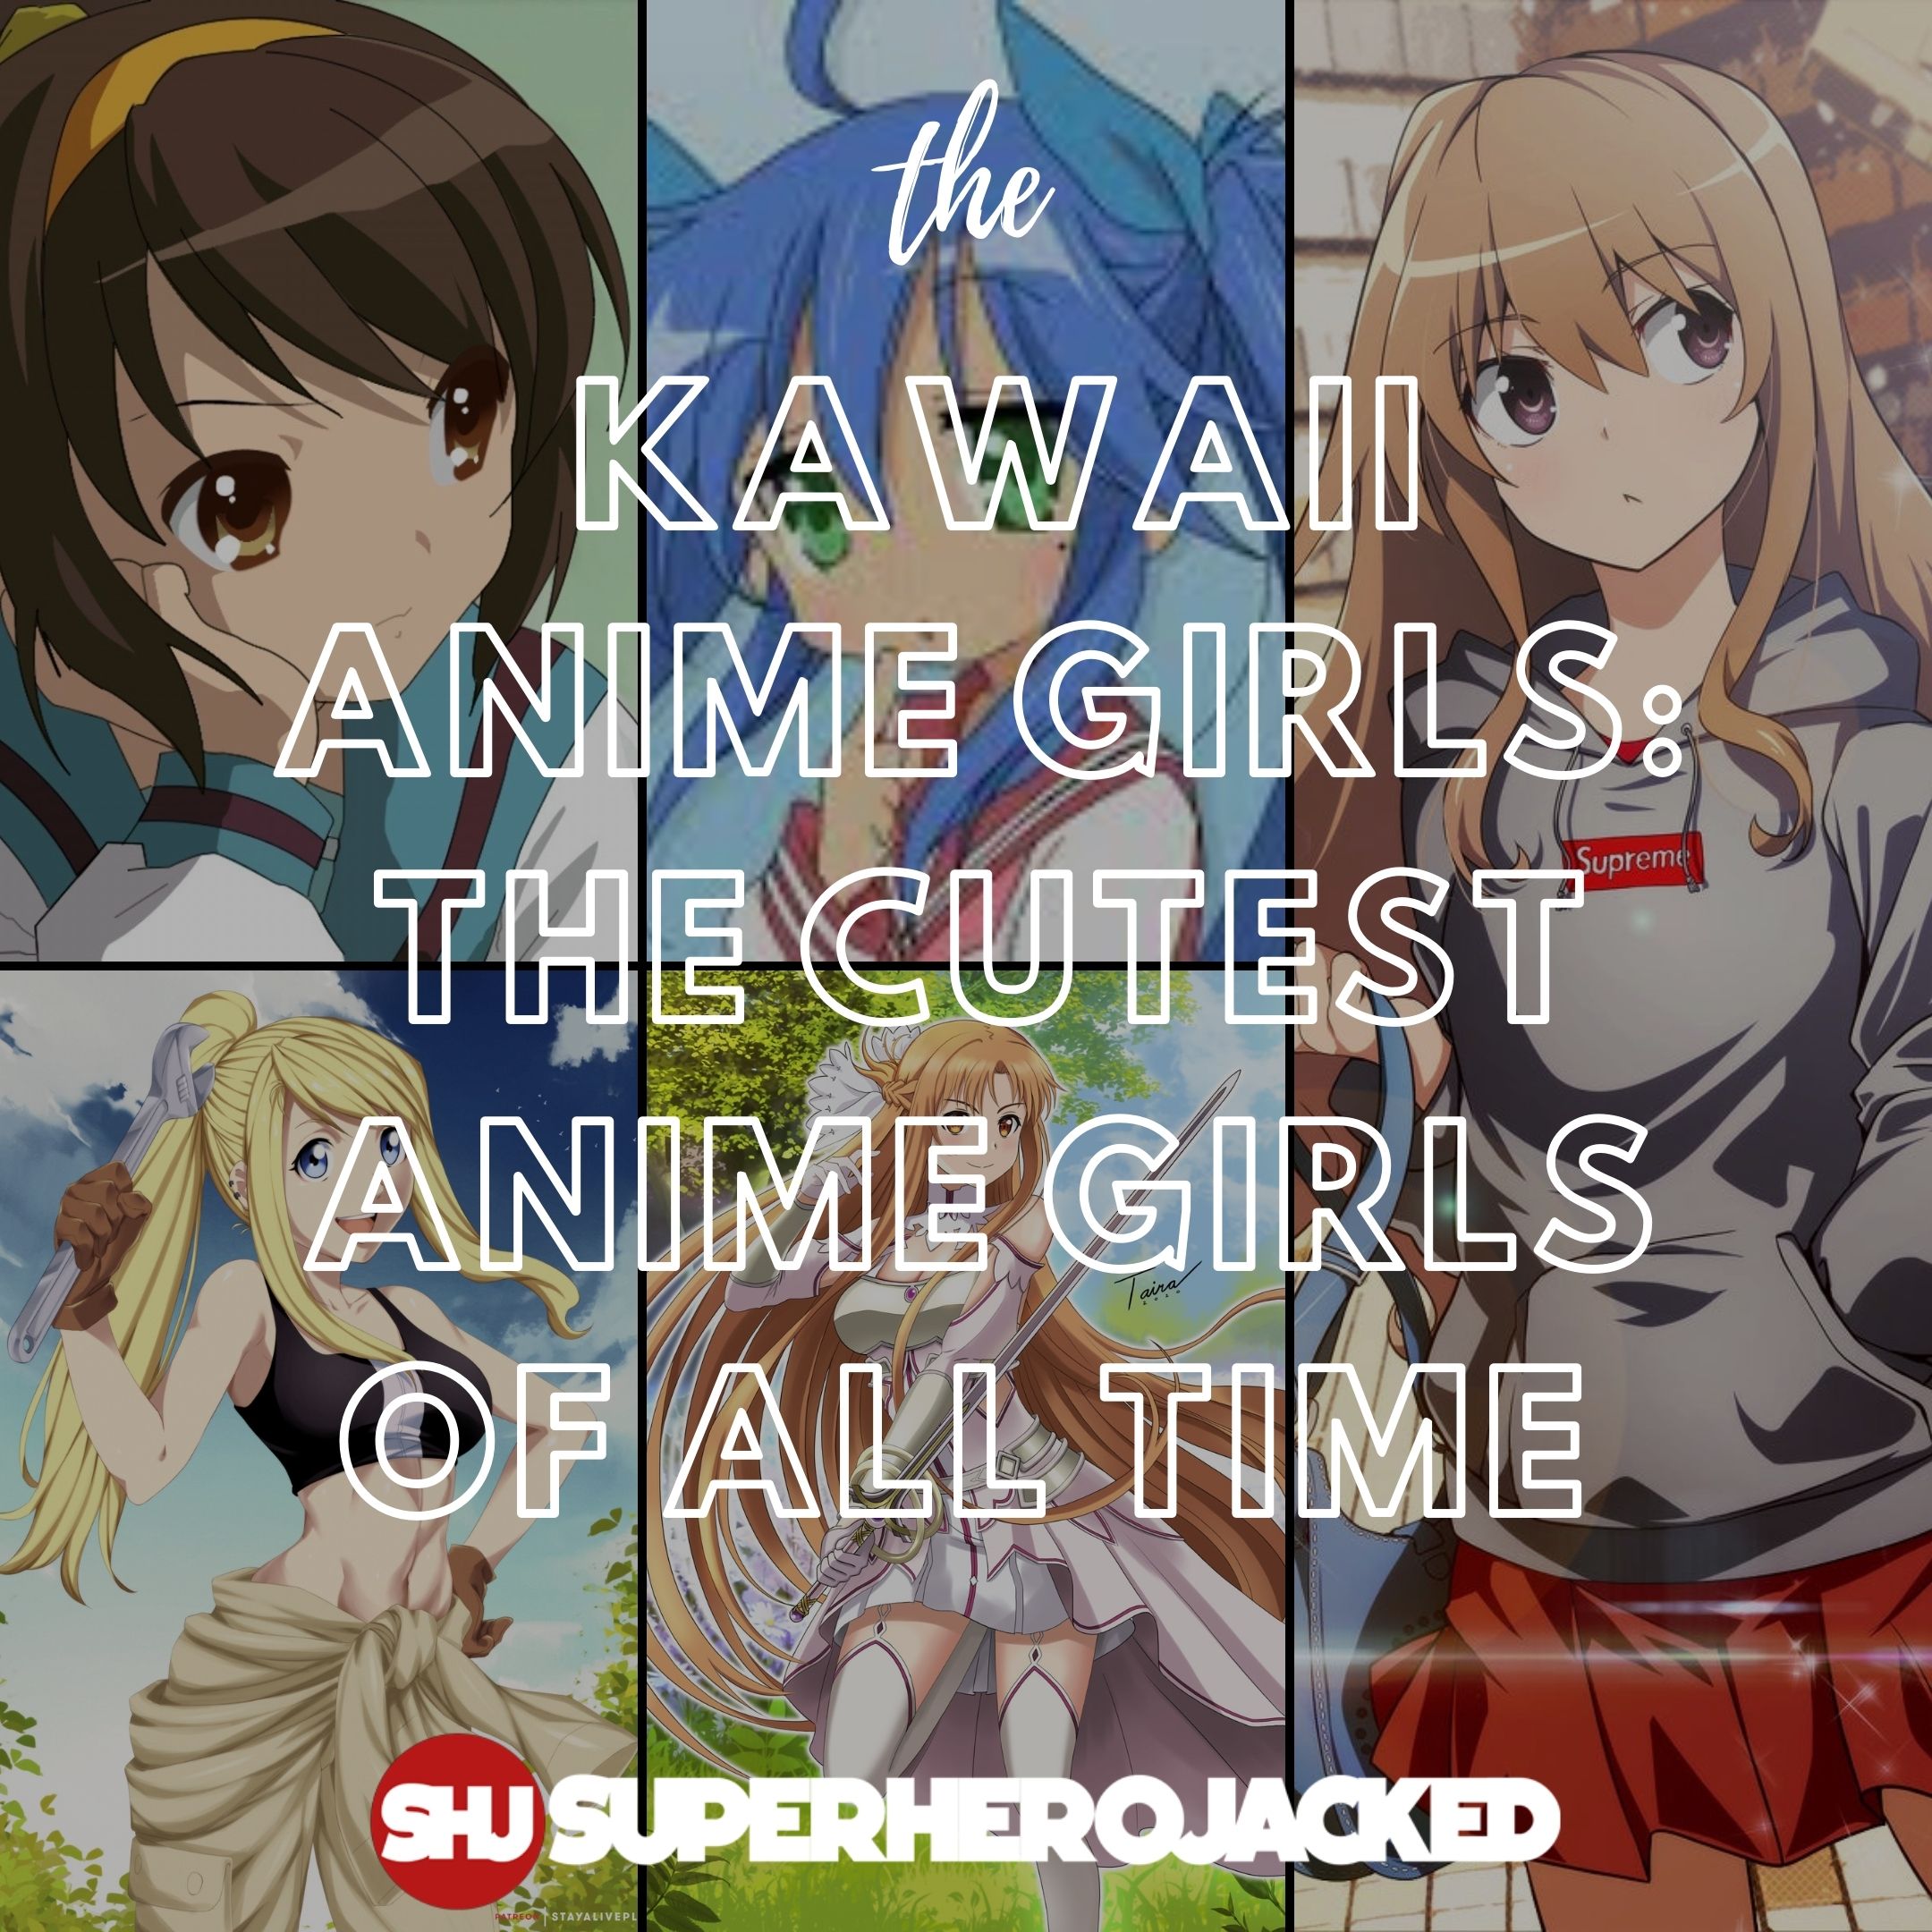 30 cutest anime girls of all time from popular shows and movies - Legit.ng-demhanvico.com.vn